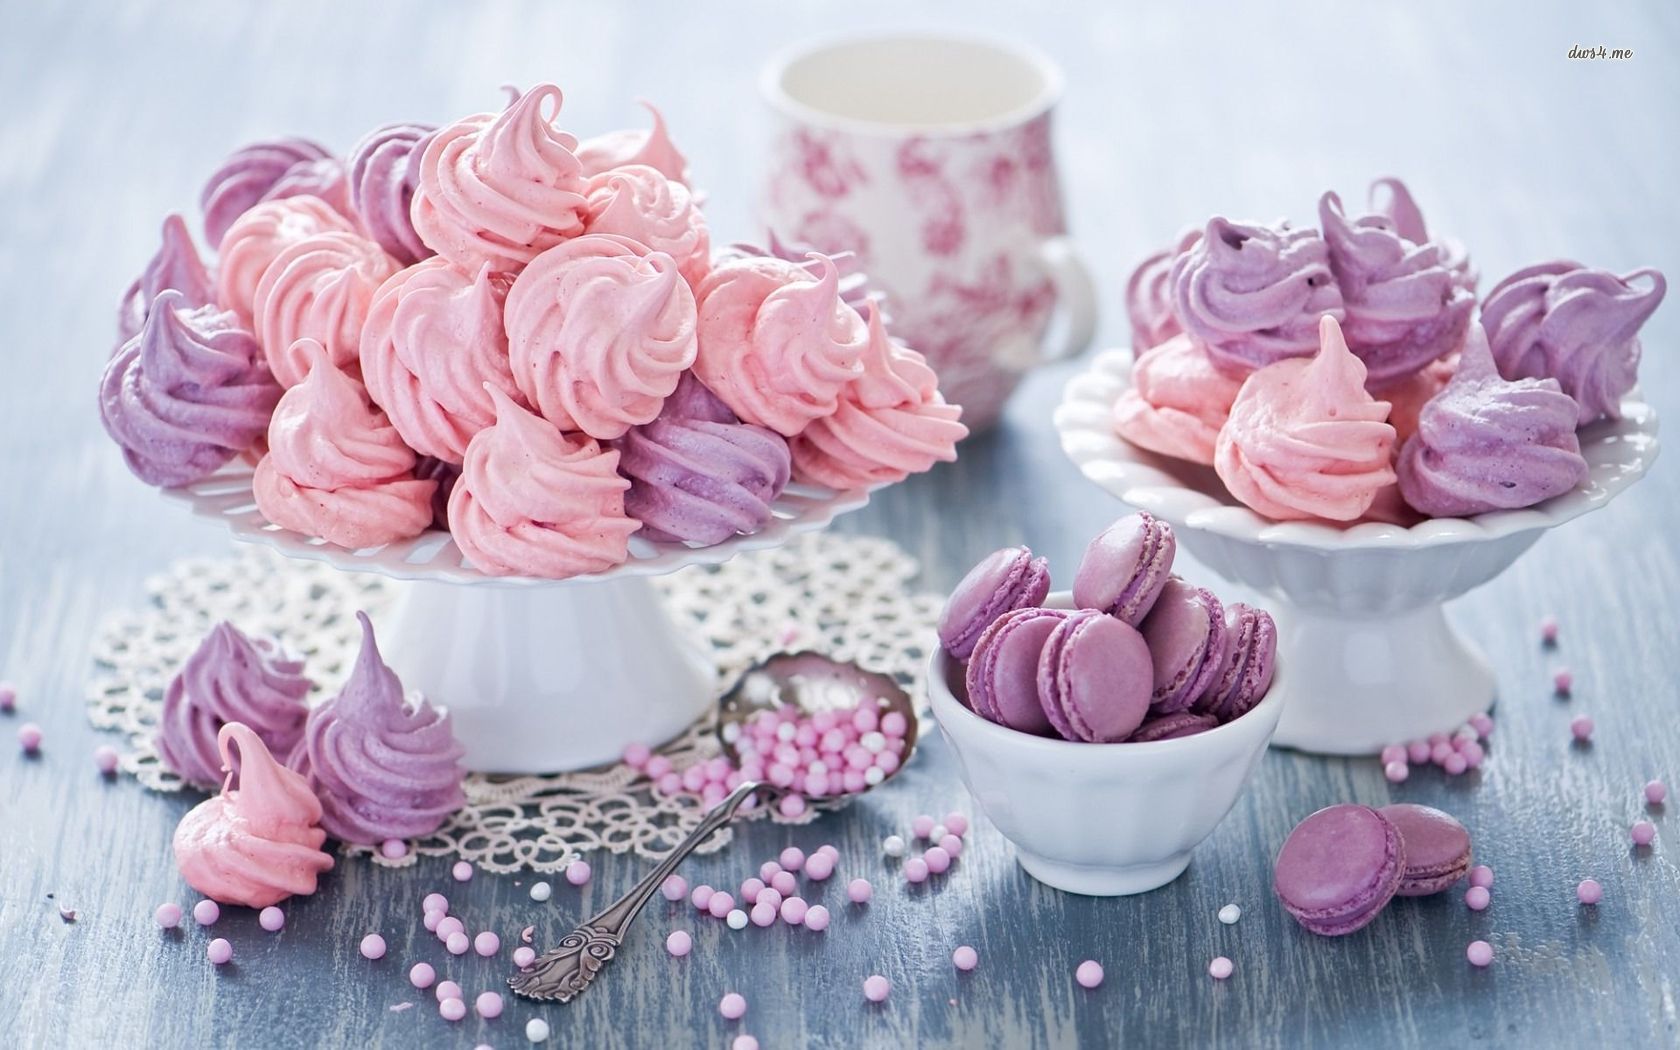 Meringues and macaroons wallpaper - Photography wallpapers - #25805